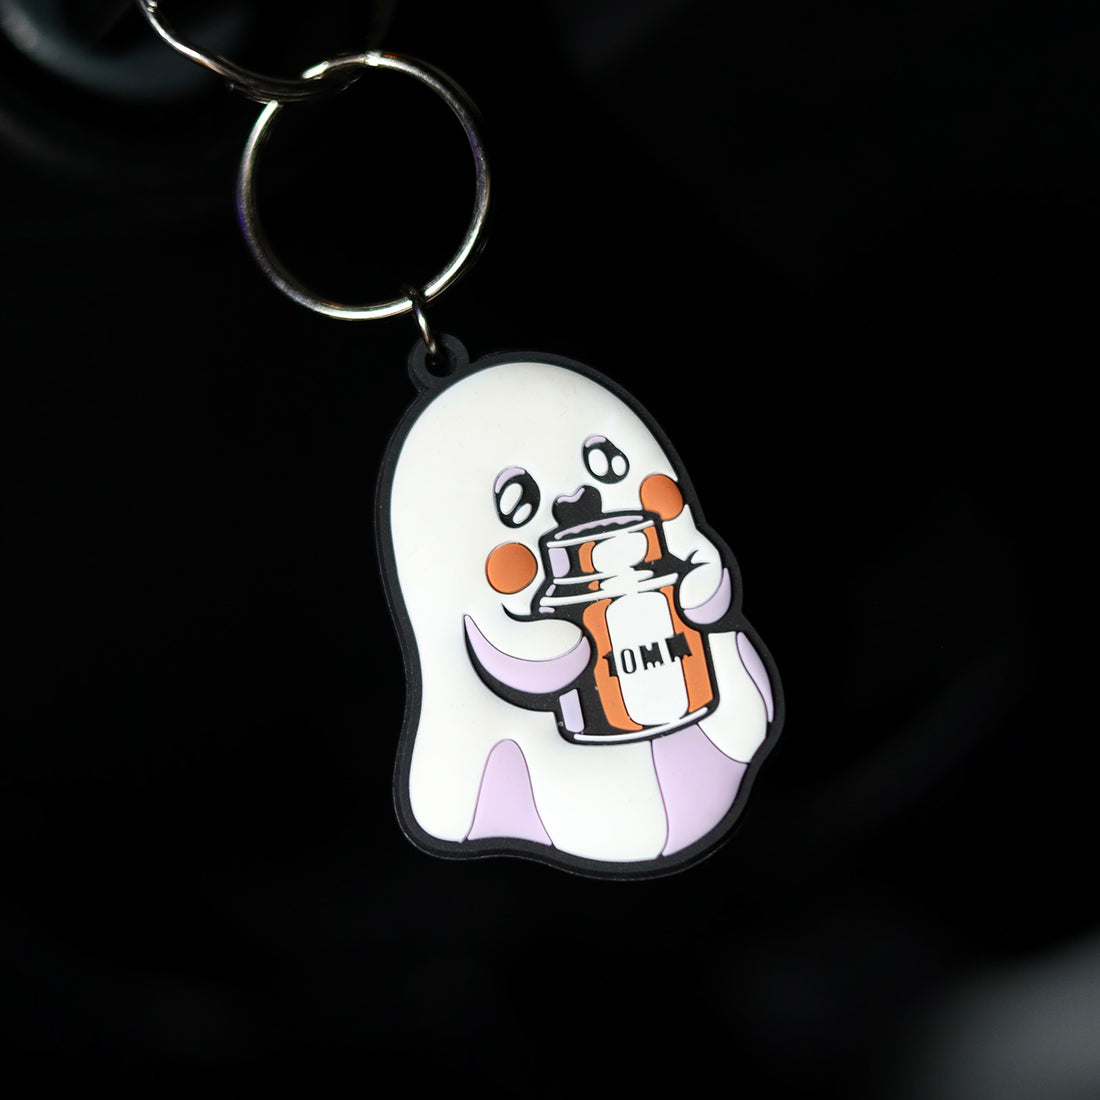 Spooky Ghost with 10mm Socket keychain